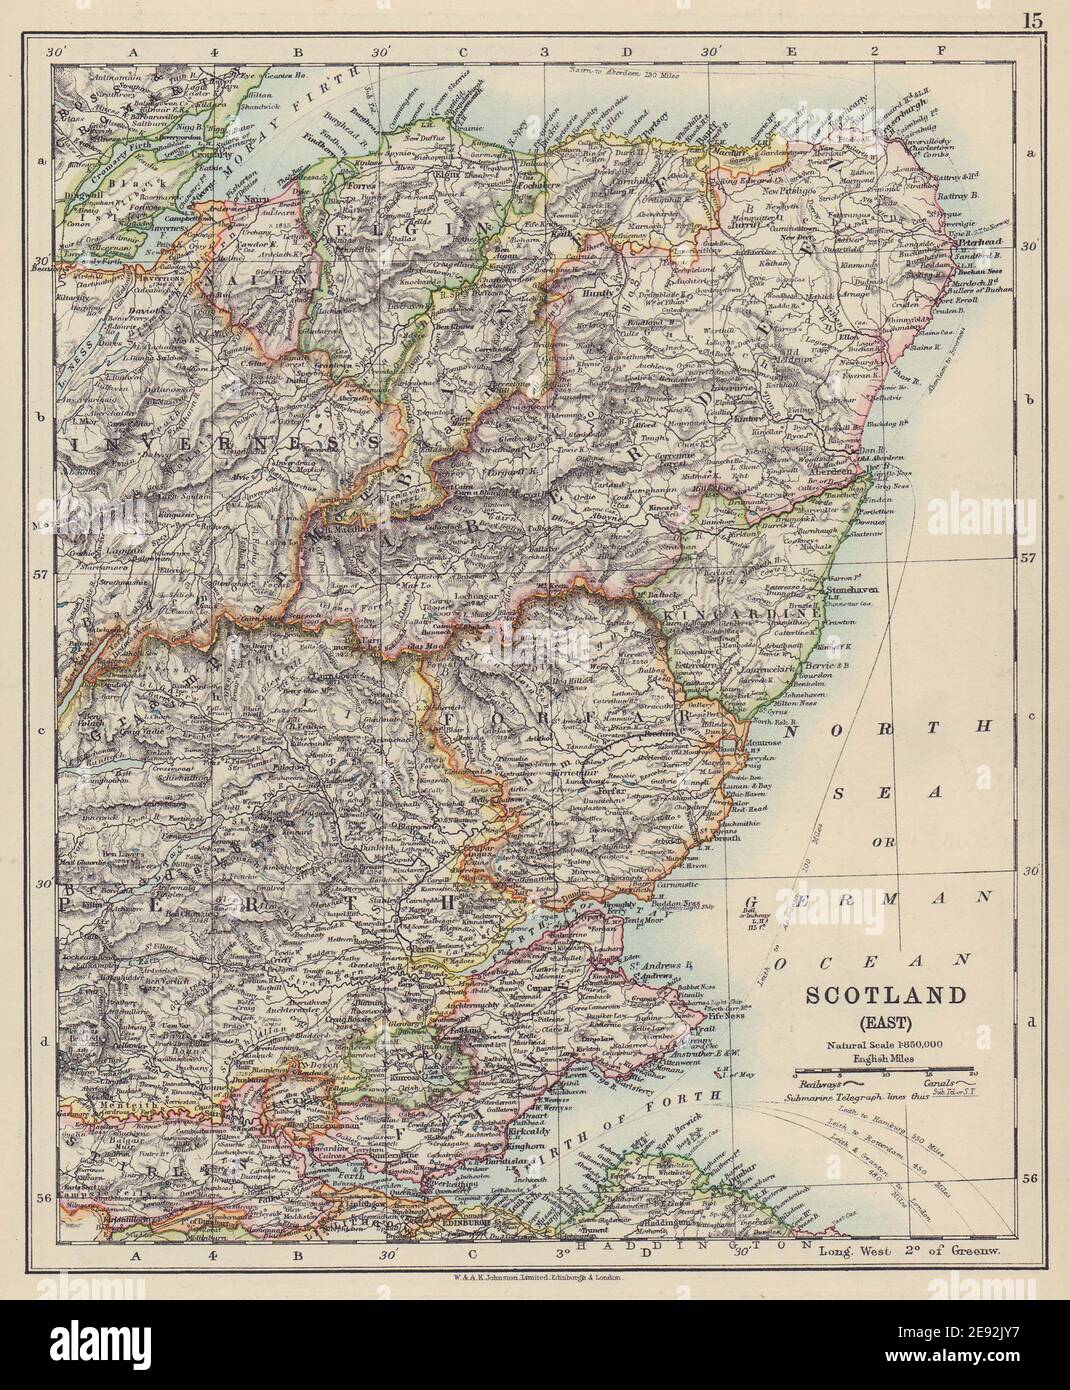 SCOTLAND EAST. Grampian Tayside Fife Firth of Forth Aberdeen. JOHNSTON 1910 map Stock Photo